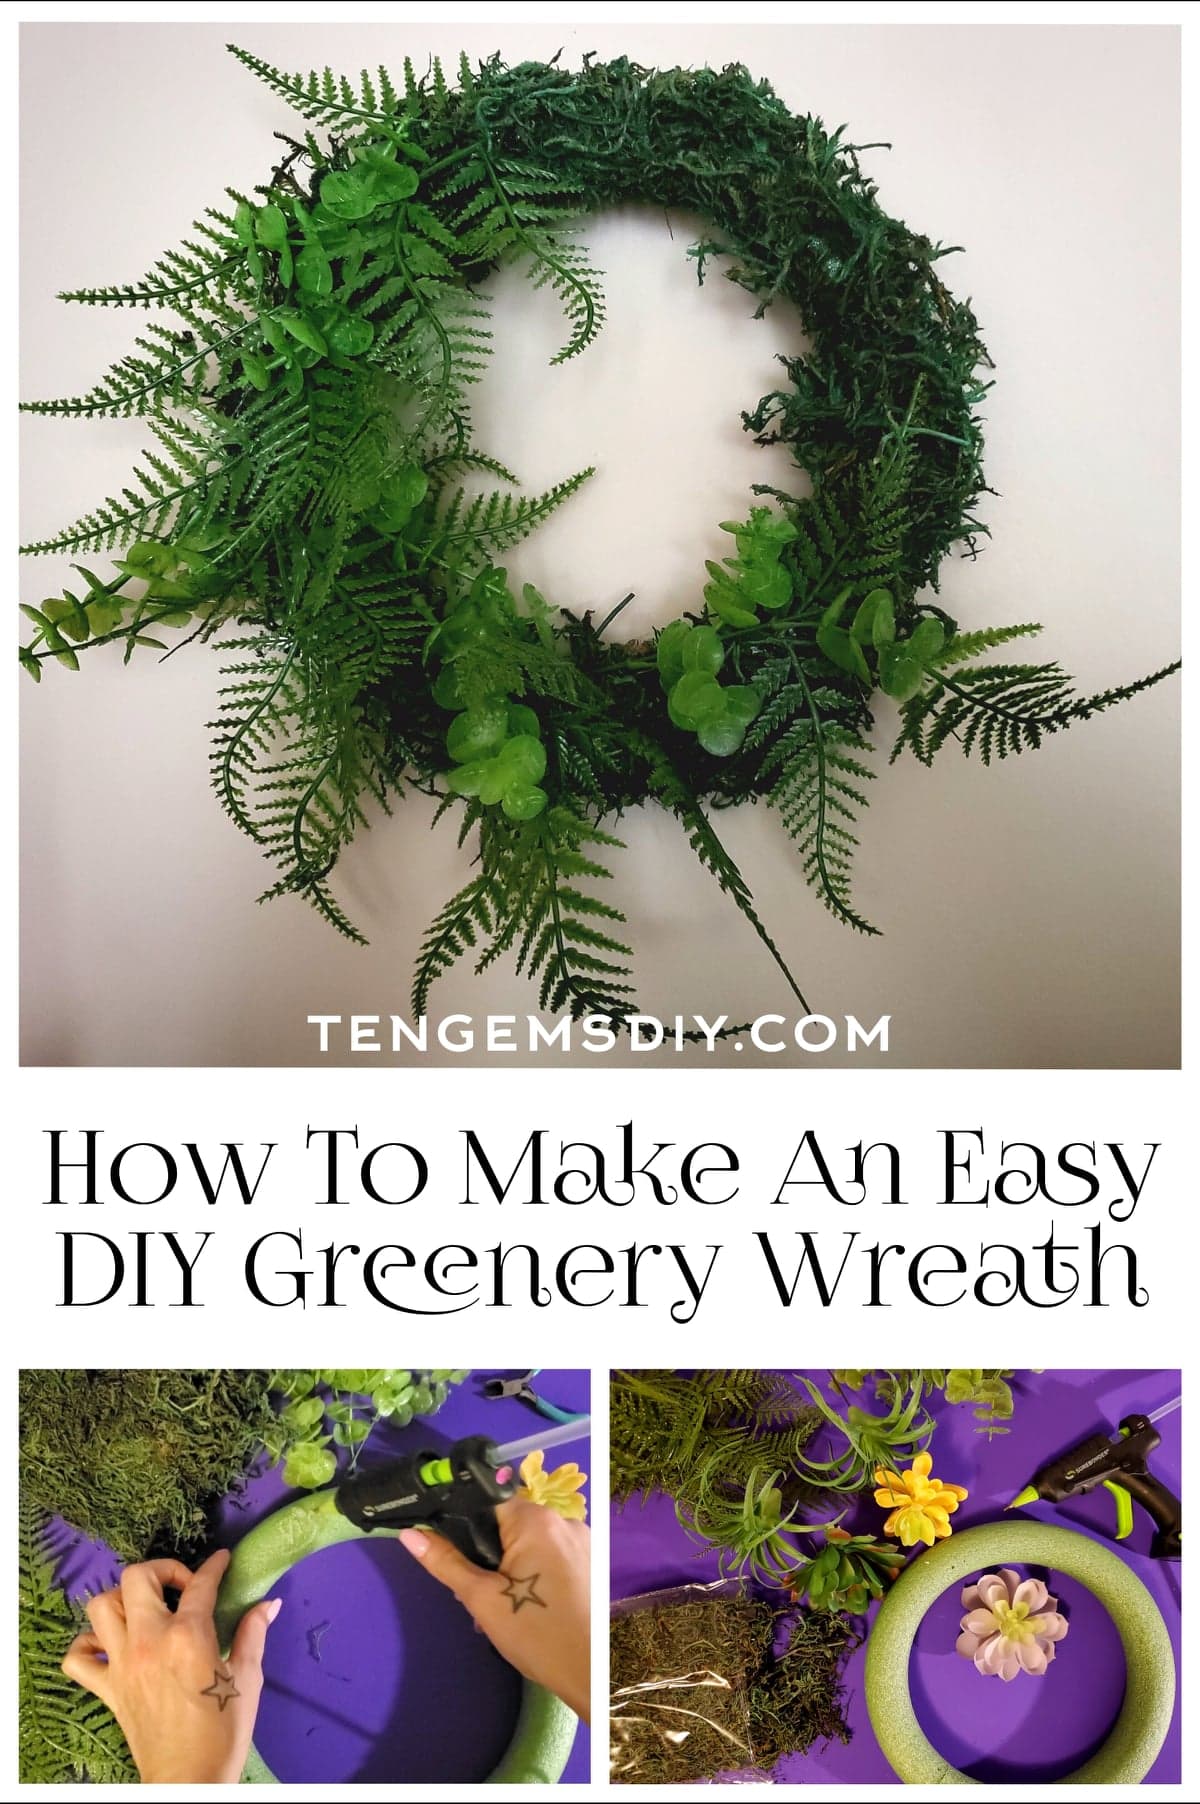 How to make an easy diy greenery wreath, how do you attach dry moss to a wreath, greenery wreath, fern wreath, fern wreaths for front door, diy faux fern wreath, diy faux greenery wreath, how to make a bohemian wreath, fern wreath diy, artificial fern wreath, greenery wreath ideas, diy greenery hoop wreath, floral wreath ideas, how do you make a greenery wreath, how do you attach greenery to a wreath, greenery wreath for front door, where to get foliage for wreaths, how to make a wreath for beginners,